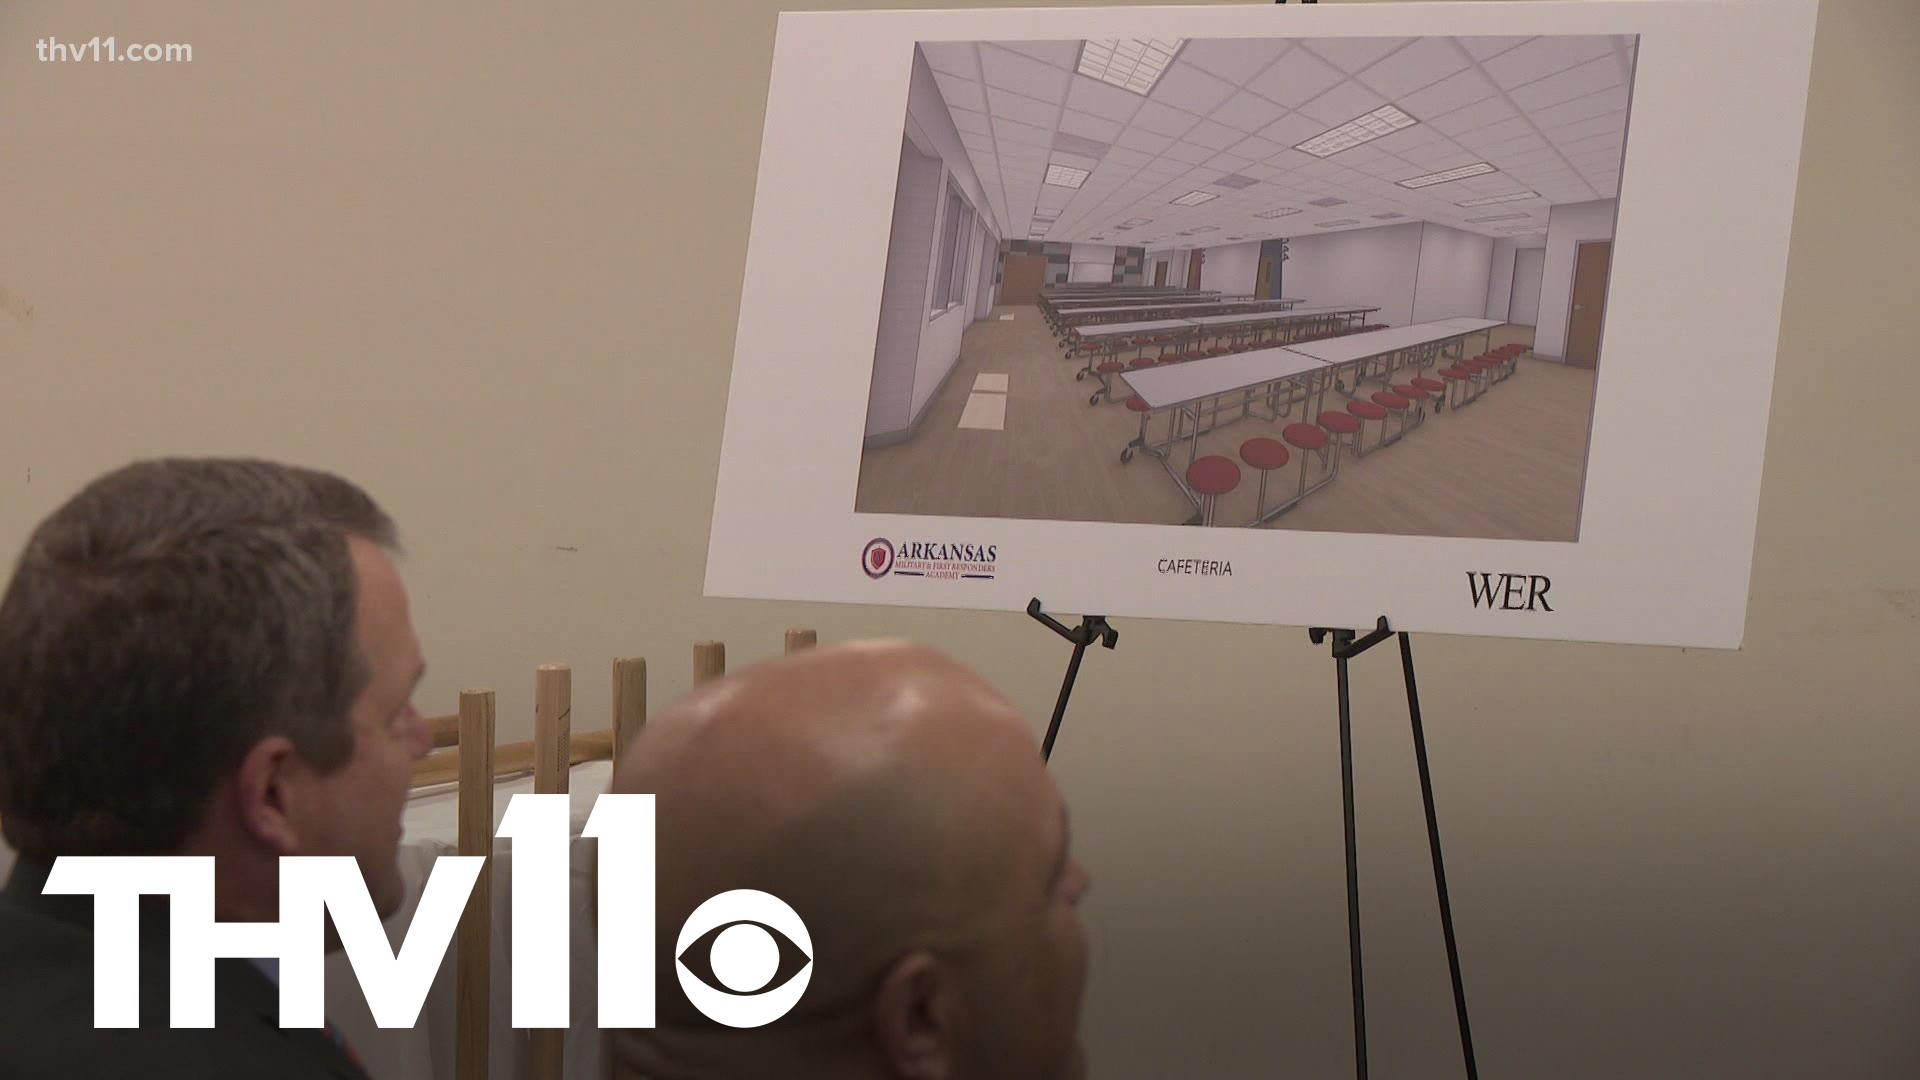 A church is being transformed into a high school that will be the first of its kind in the state— the Arkansas Military and First Responders Academy opens Aug. 2023.